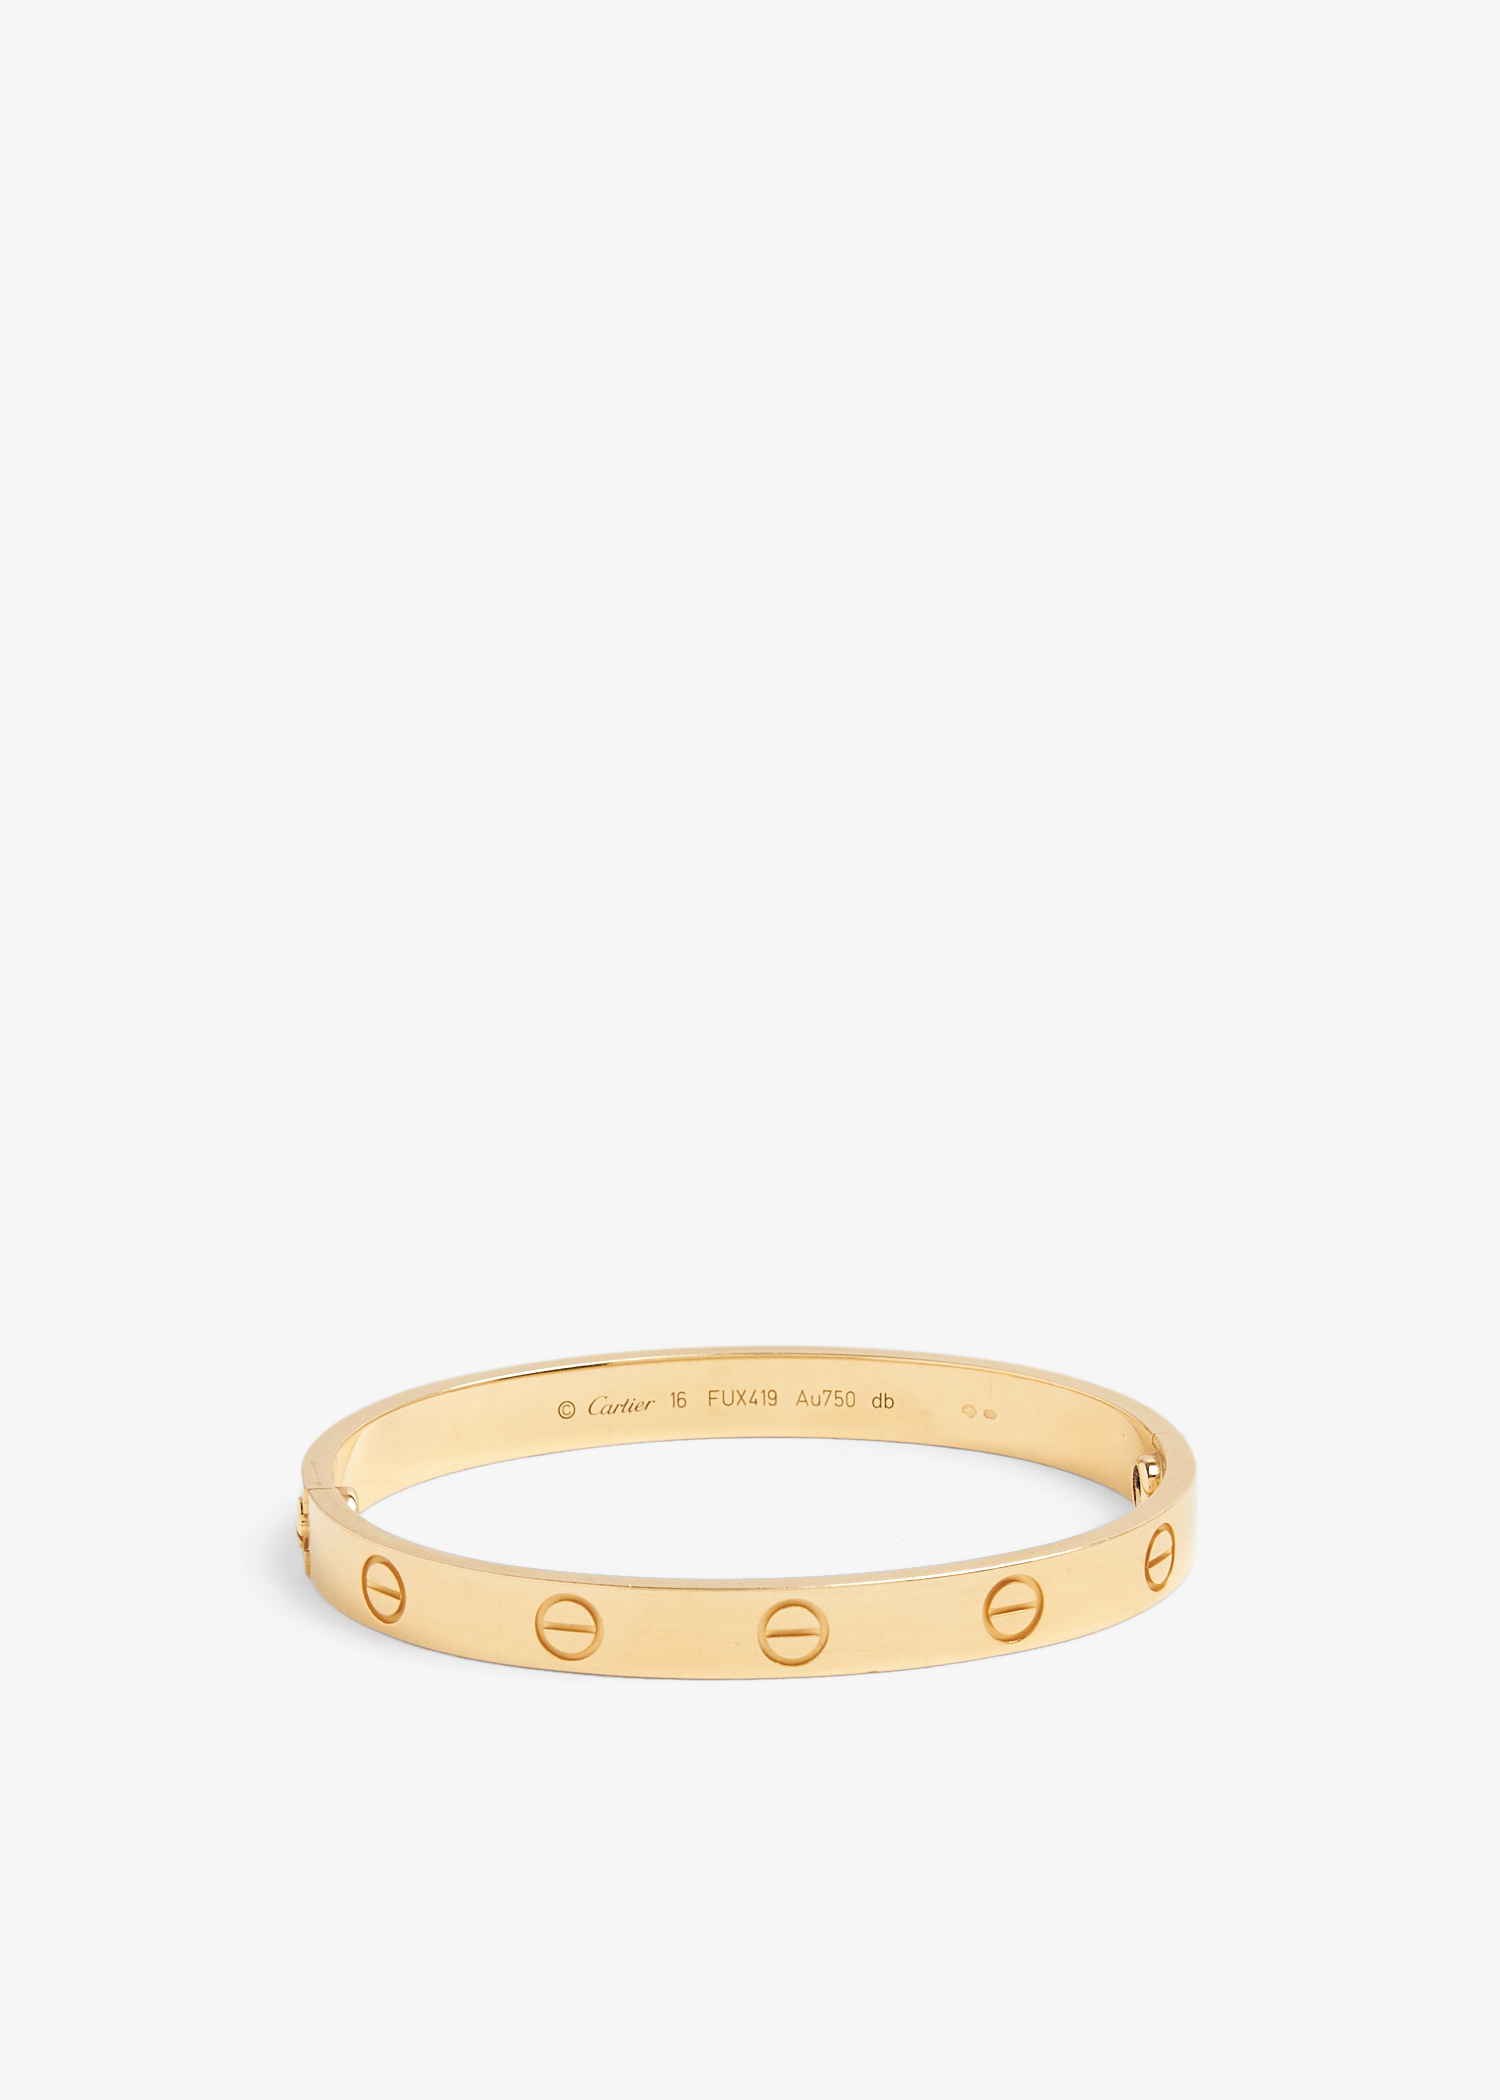 Image of A Gold 'Love' Bangle Bracelet, by Aldo Cipullo for Cartier, by  Cartier